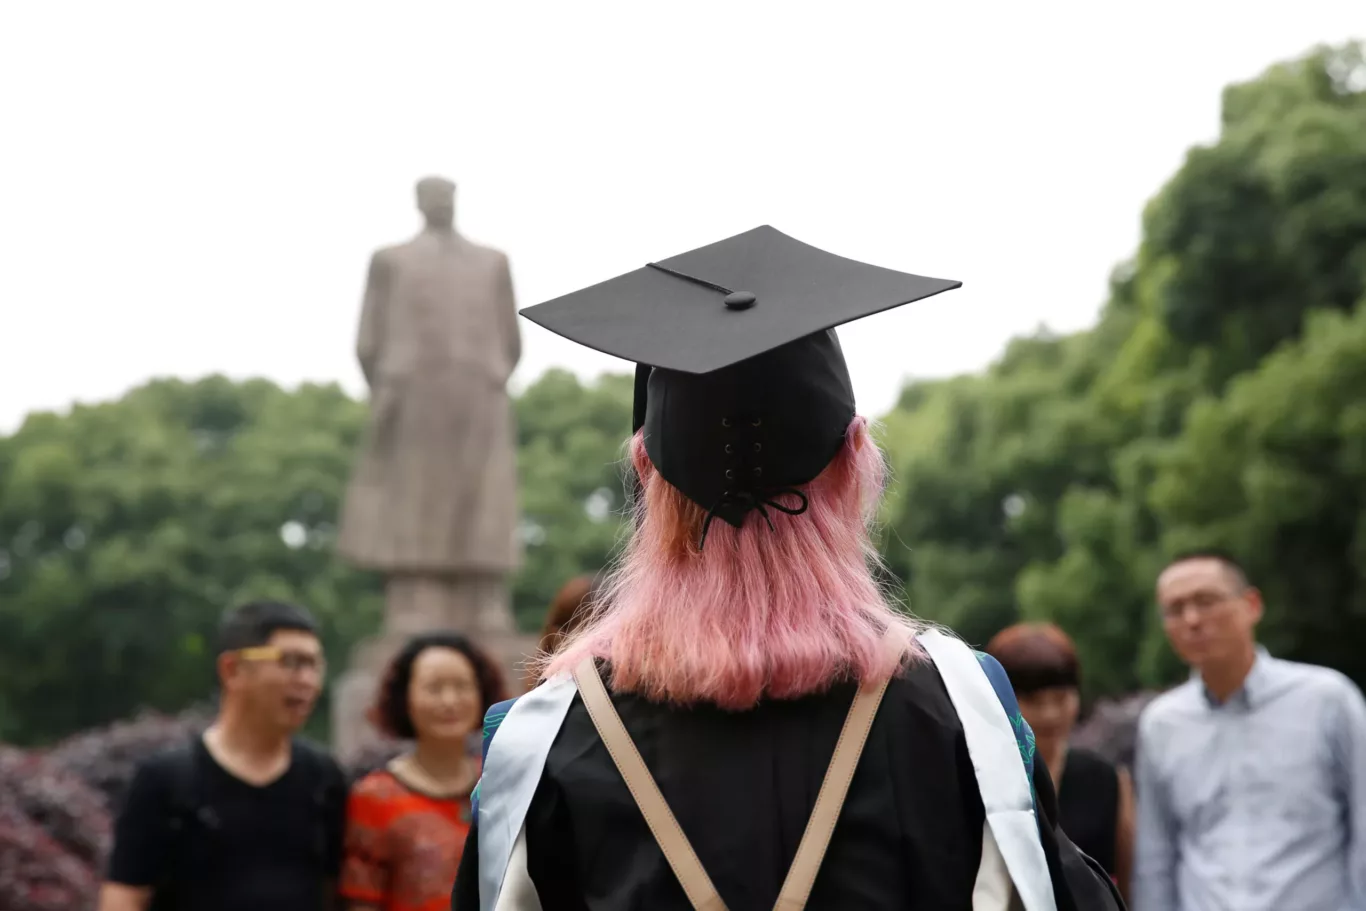 A student stands in front of the statue of Chinese leader Mao Zedong after her graduation ceremony at Fudan University in Shanghai, China, 23 June 2017. (Photo: Reuters/Aly Song)